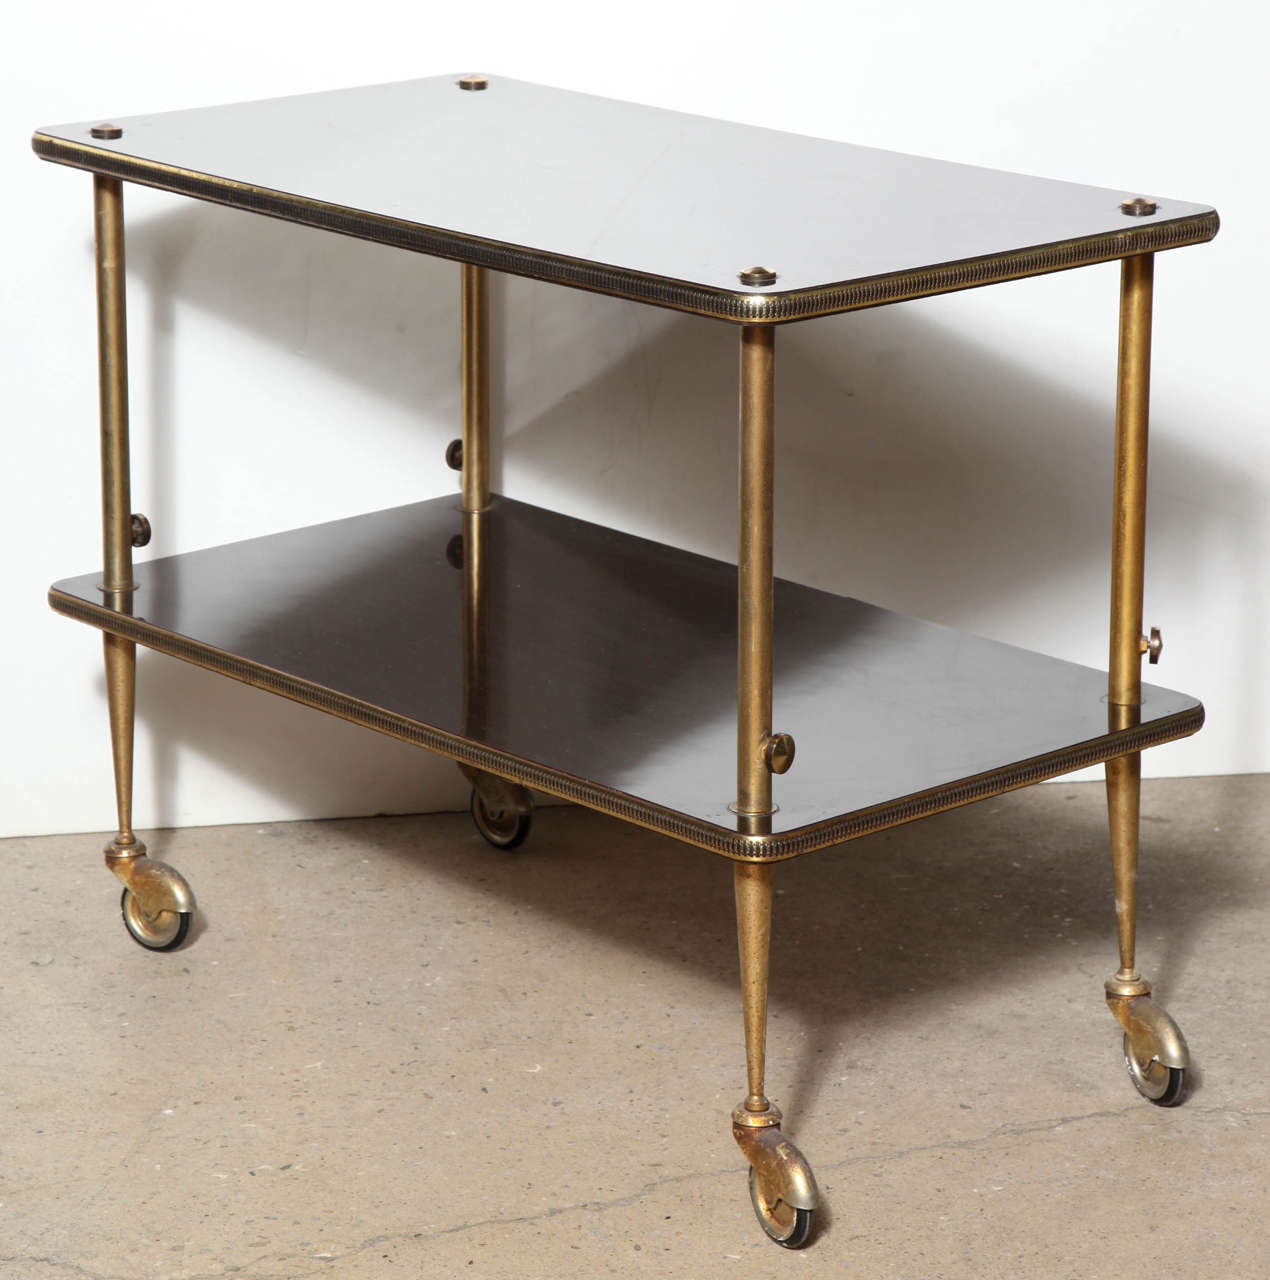 Italian Modern Rosewood and Brass rolling Coffee Cart, Tea Cart or Bar Car with Two Shelves. Each dark laminated Rosewood shelf detailed with a vertical Brass surround border, patinated Brass legs and 2.5D casters making for easy use and transport.